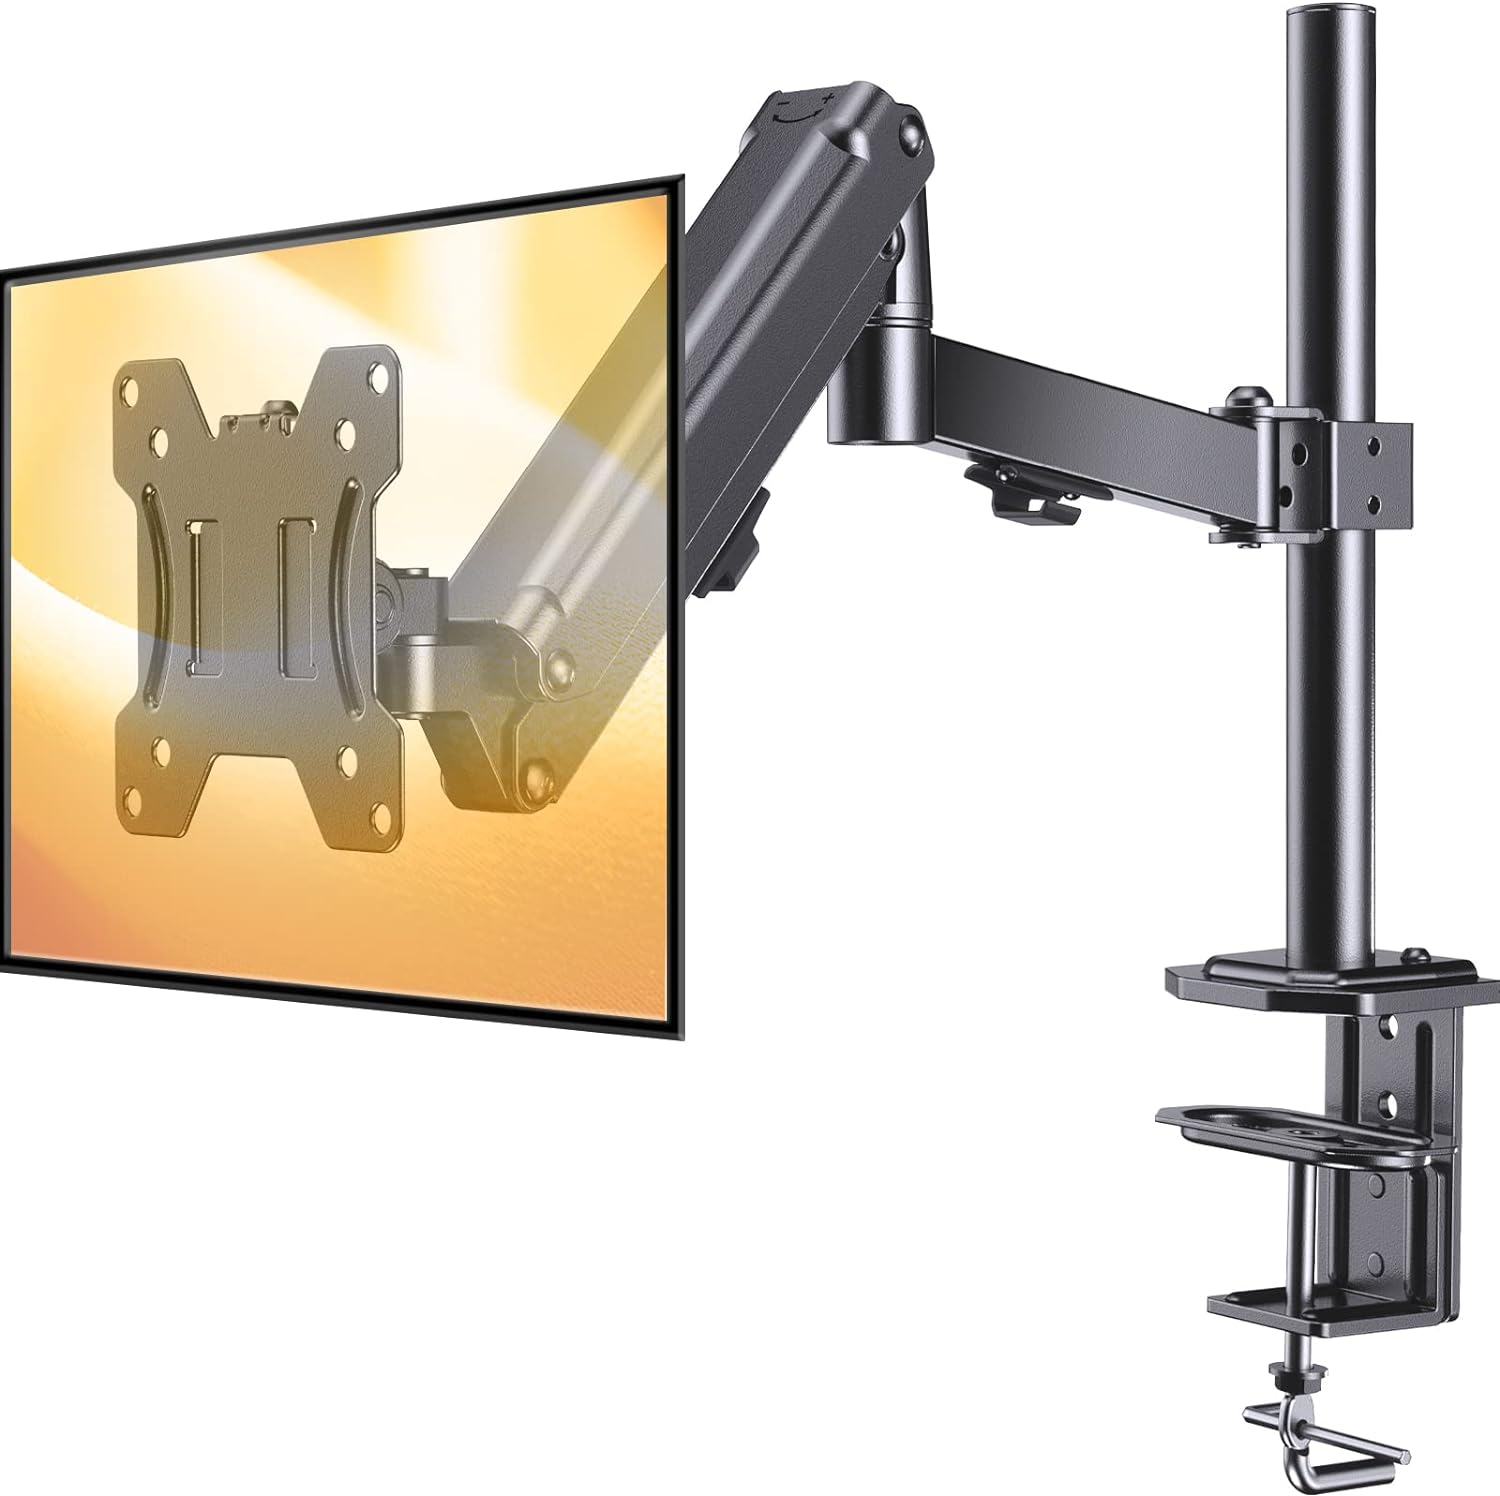 ErGear Single Arm Adjustable Monitor Mount (for 13"-32" Screen) $18 + Free Shipping w/ Prime or on $35+